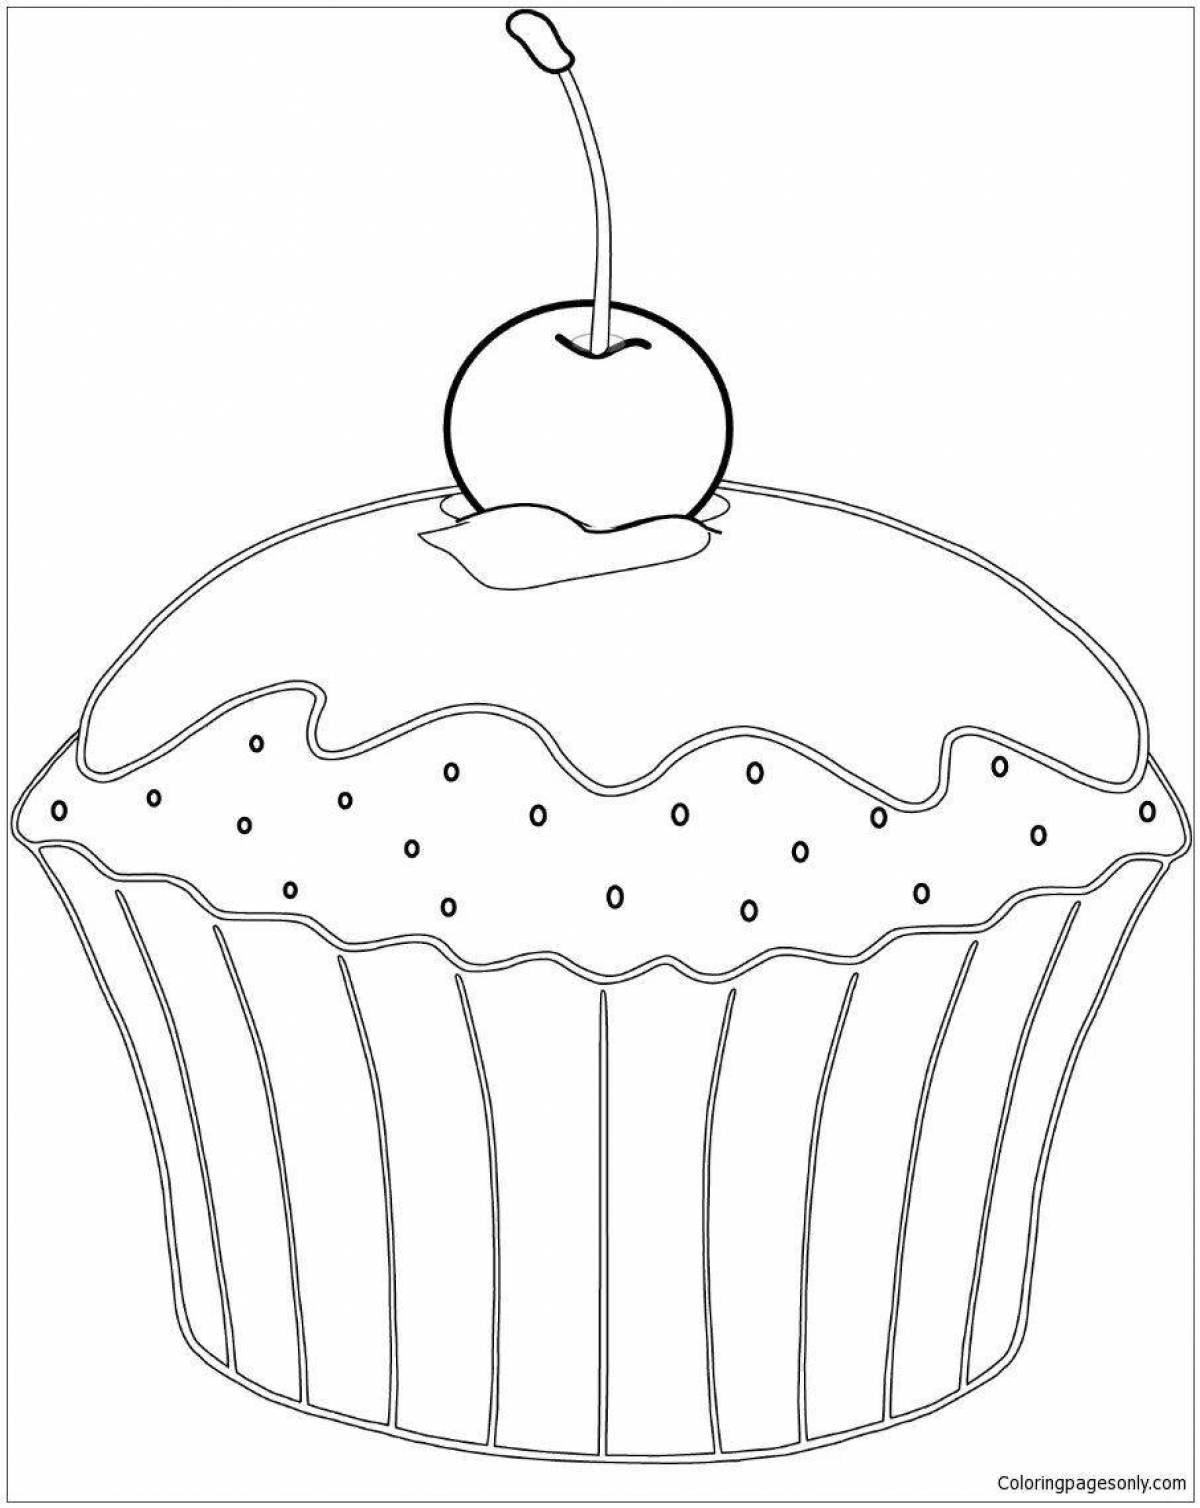 Fragrant dessert coloring page